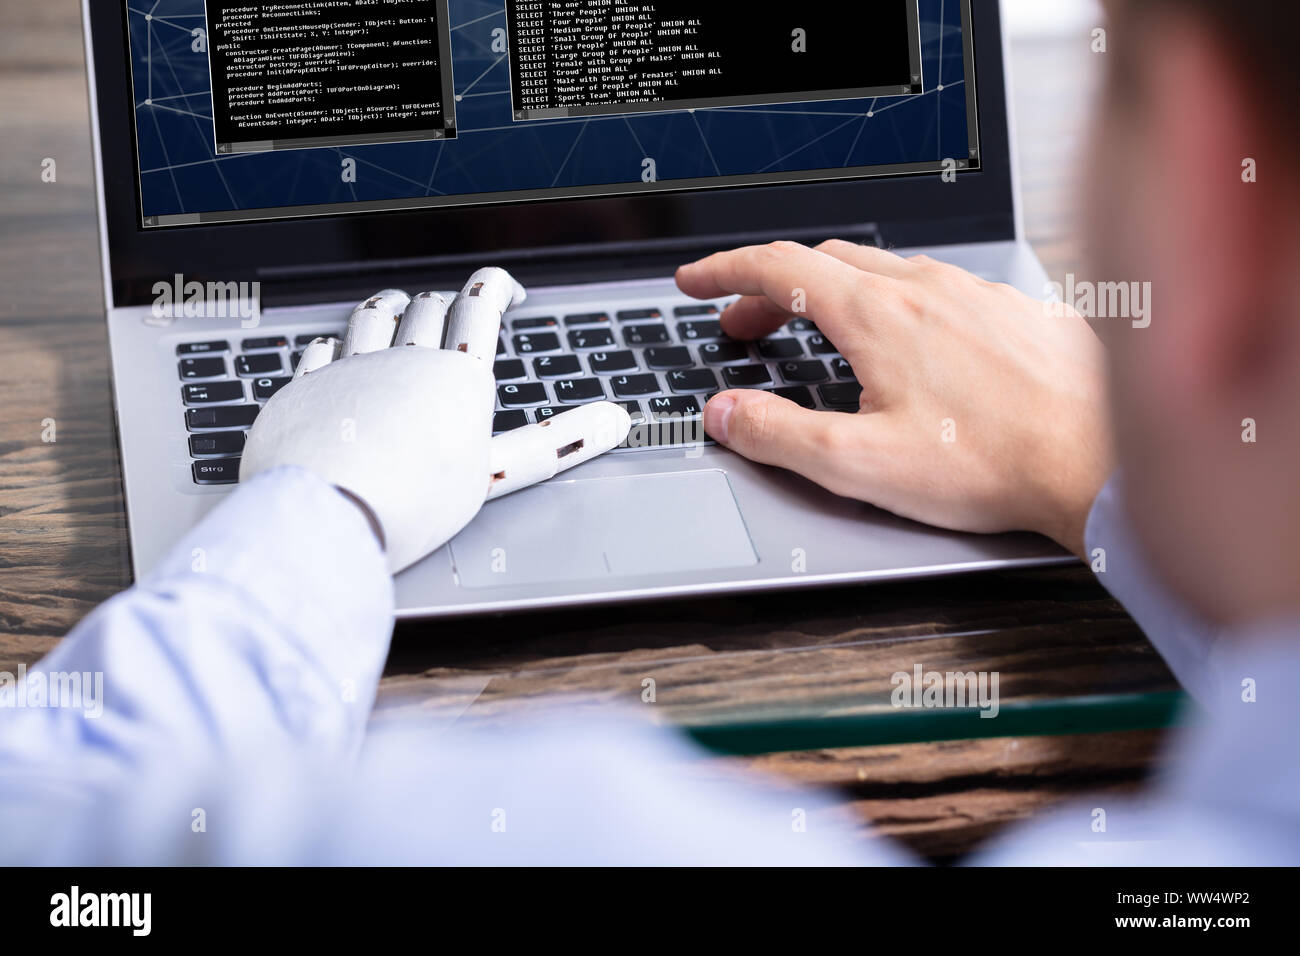 Man With Prosthetic Hand Working On Laptop. Artificial Limb Stock Photo